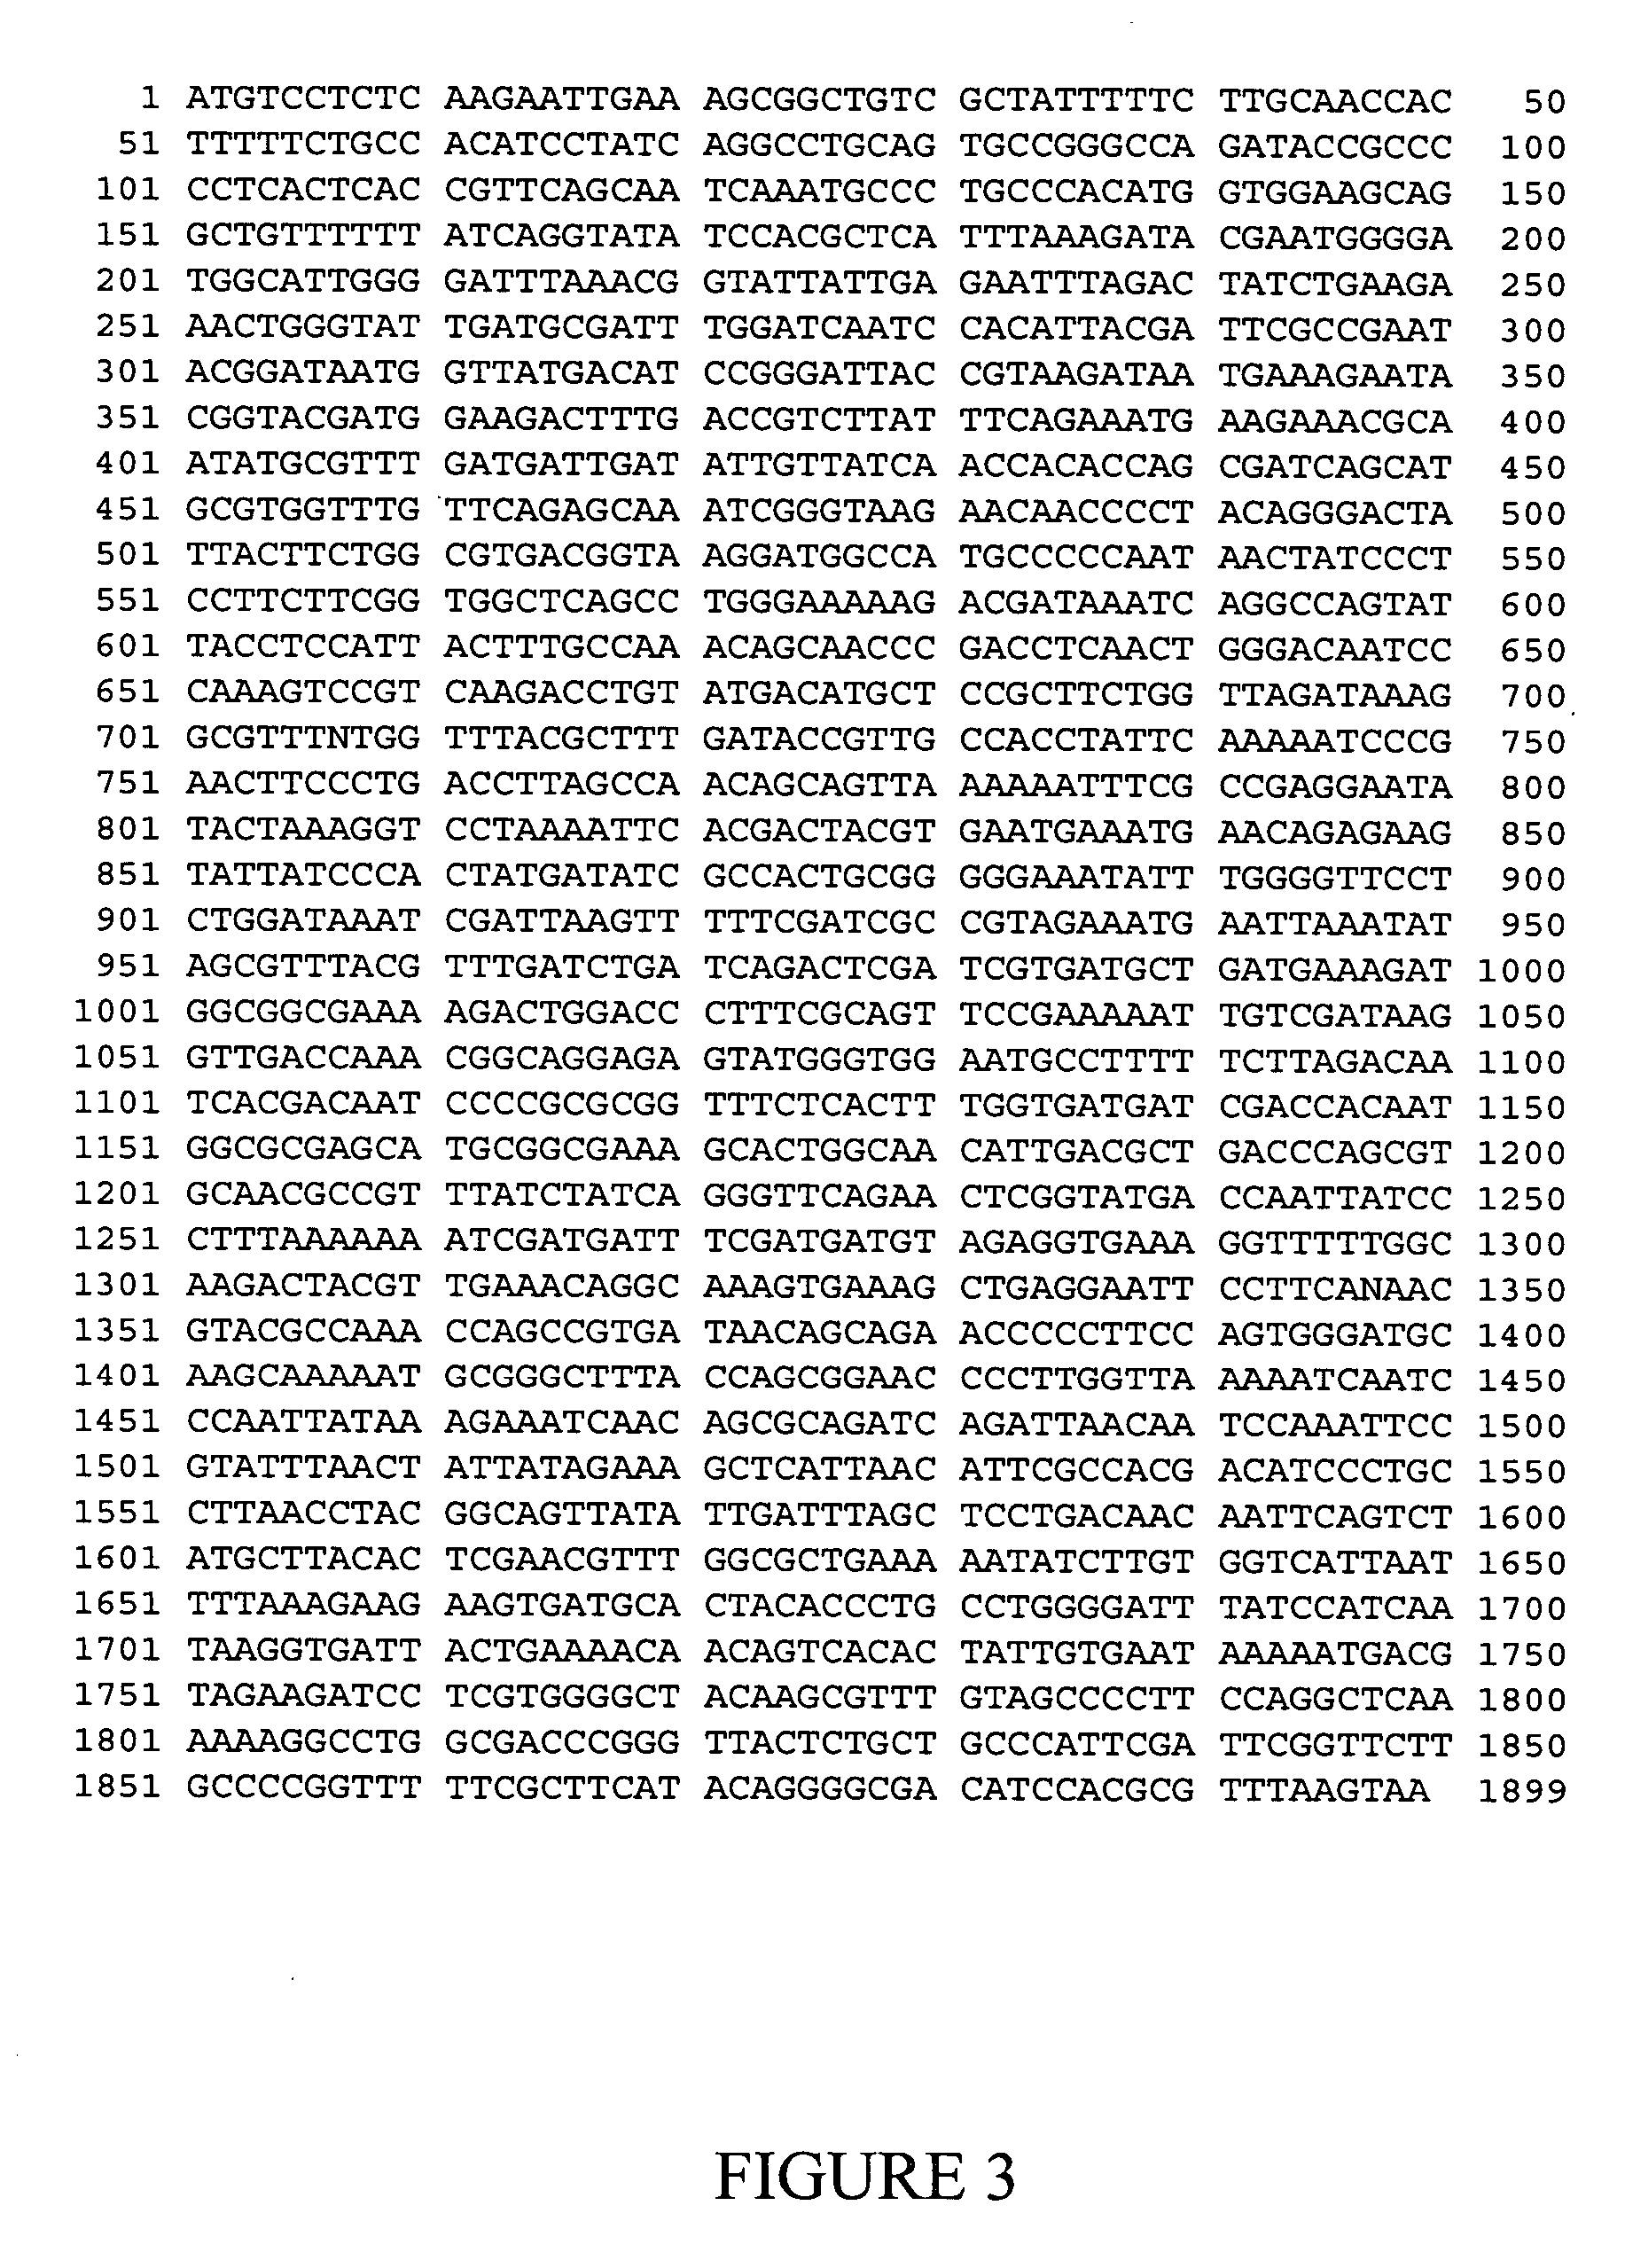 Isomaltulose synthases, polynucleotides encoding them and uses therefor